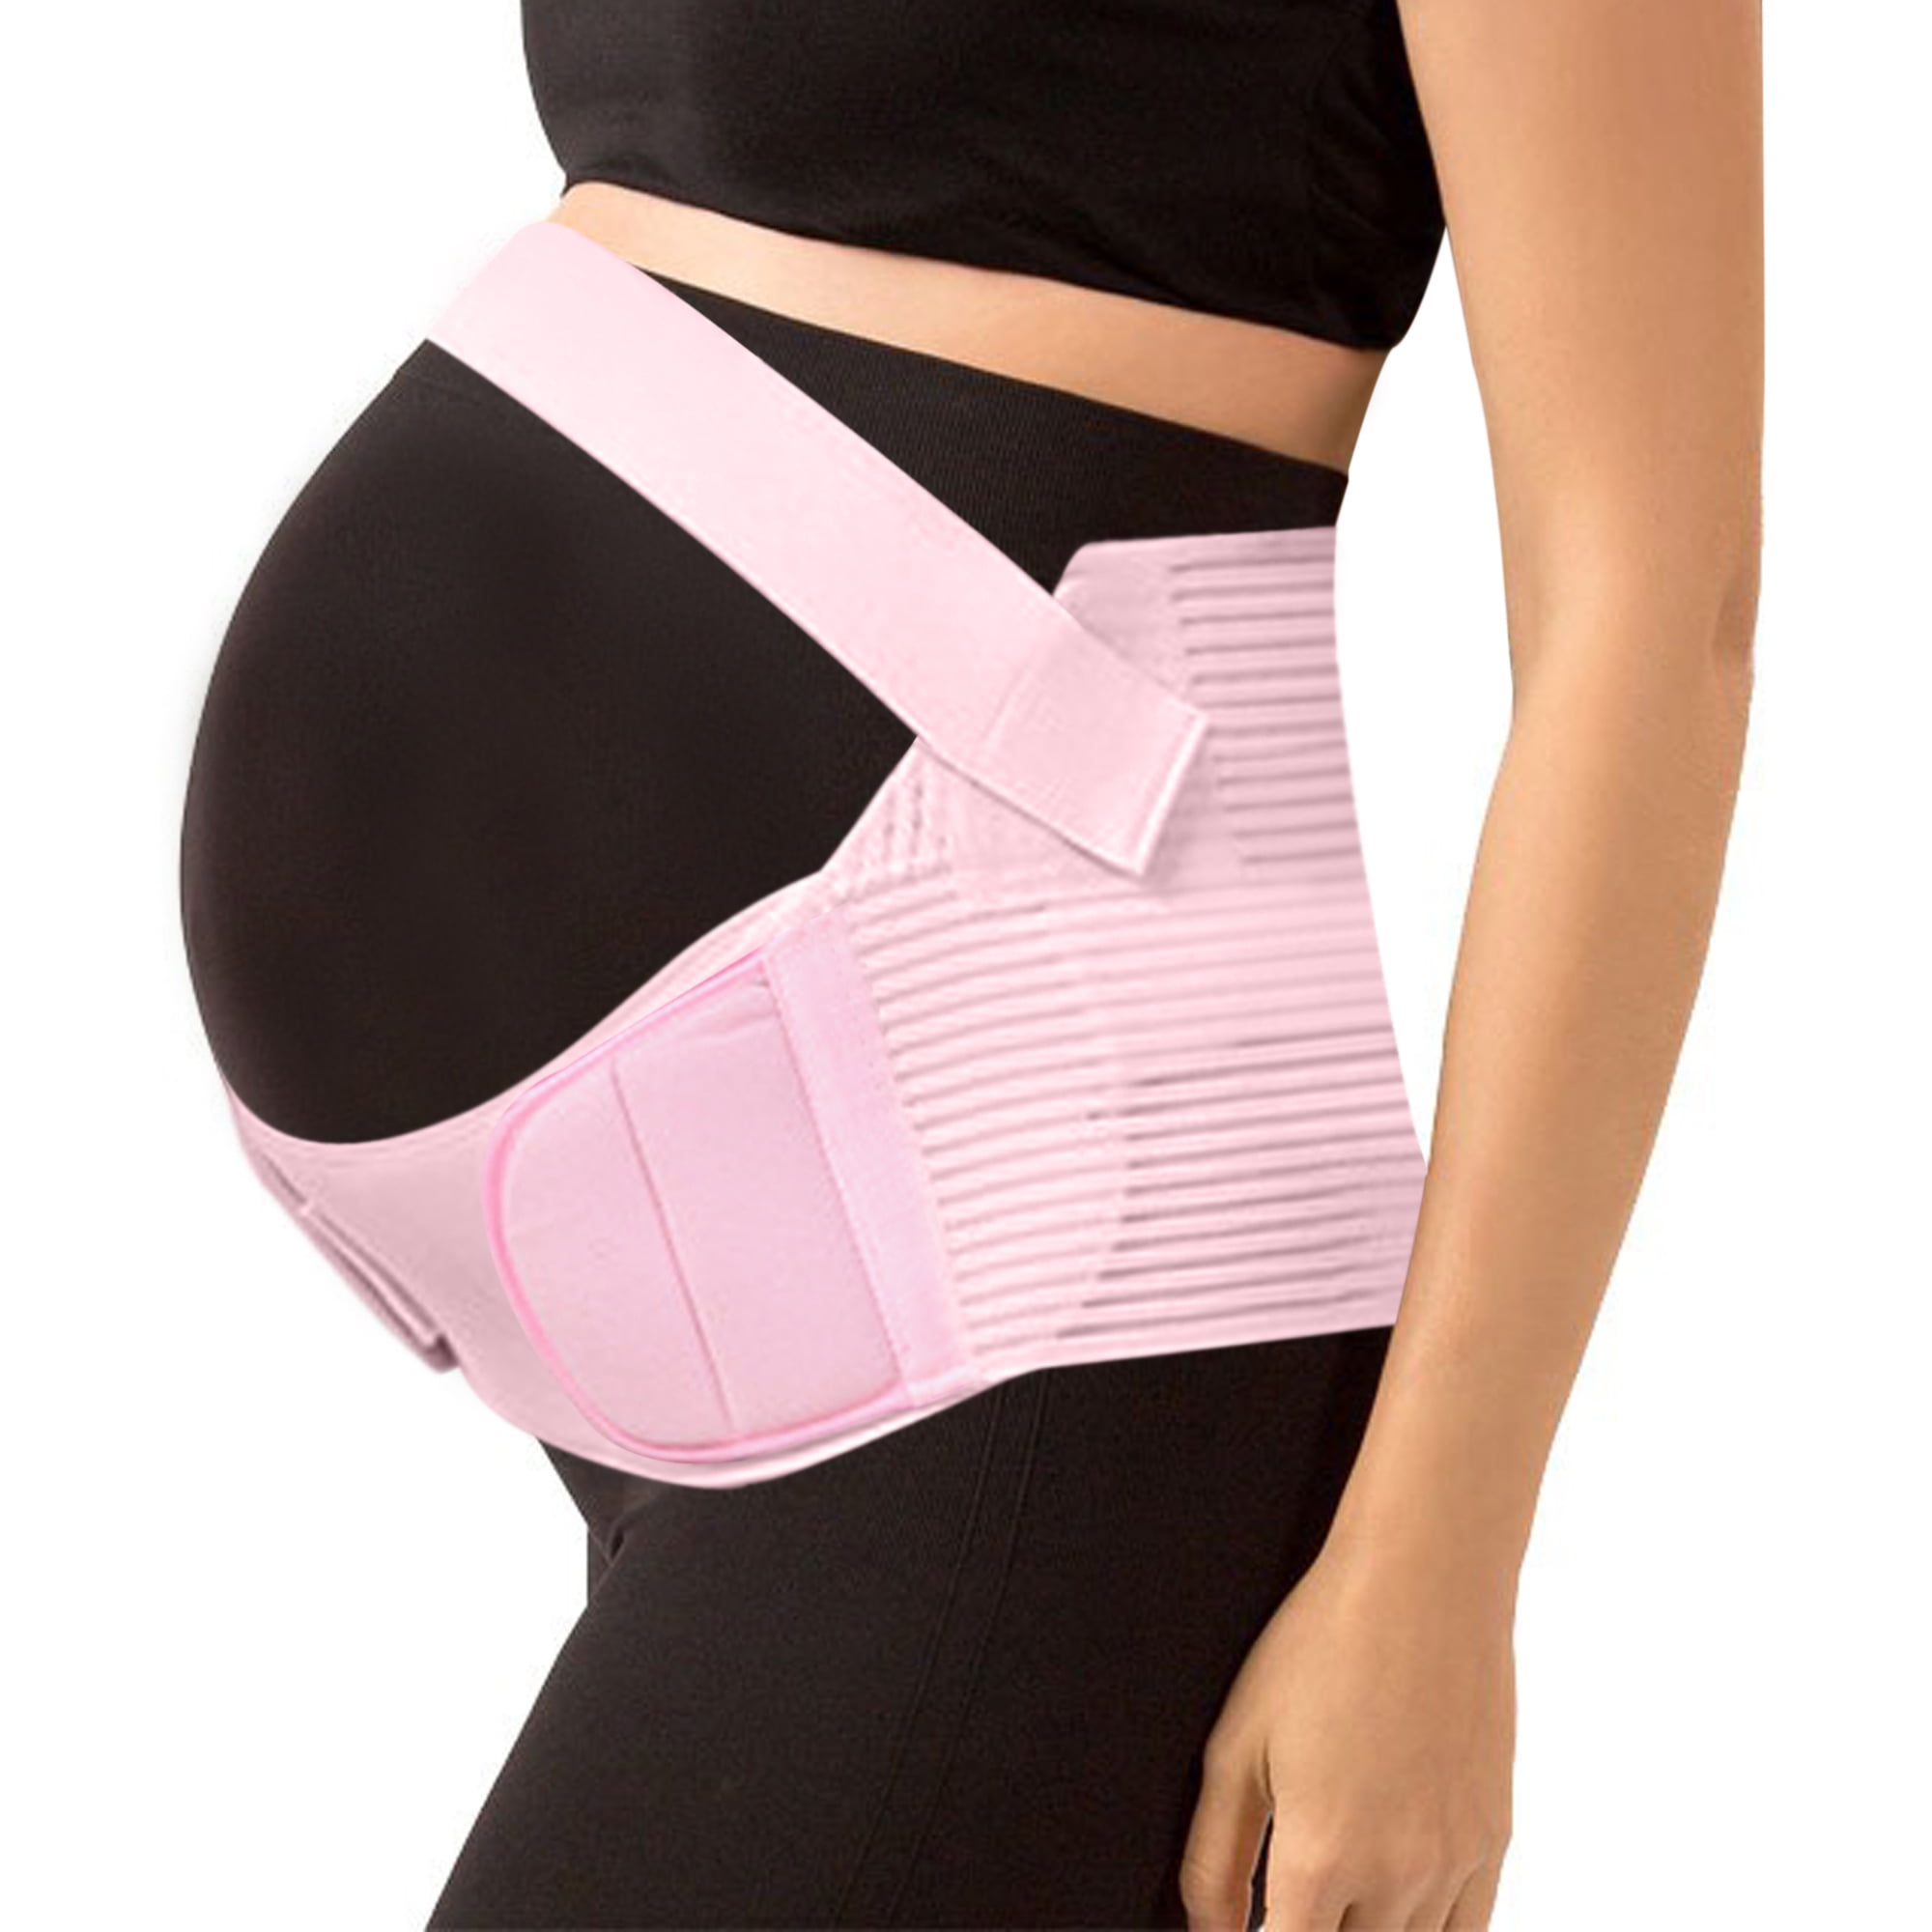 Belly band and belts: Mom's helpful accessories